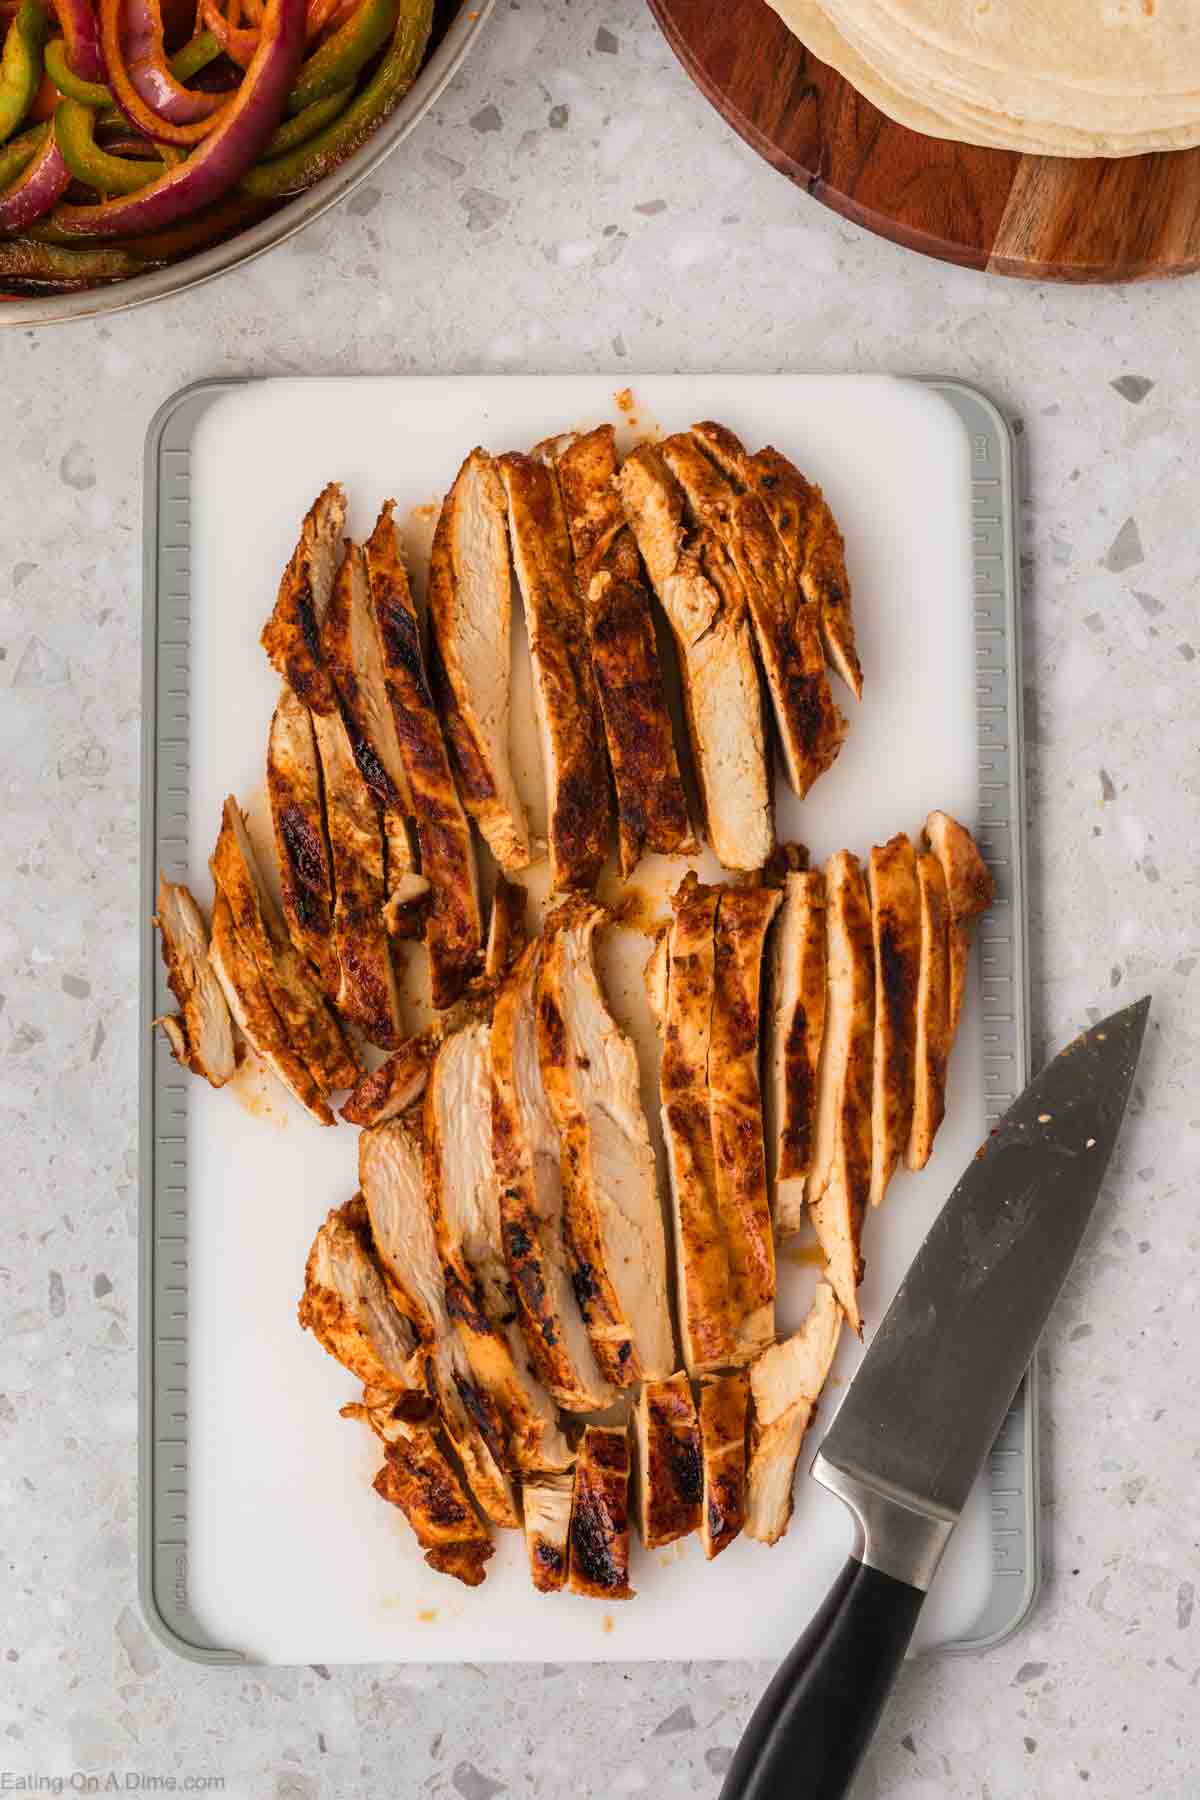 Chicken breast cut into strips on the cutting board with a knife